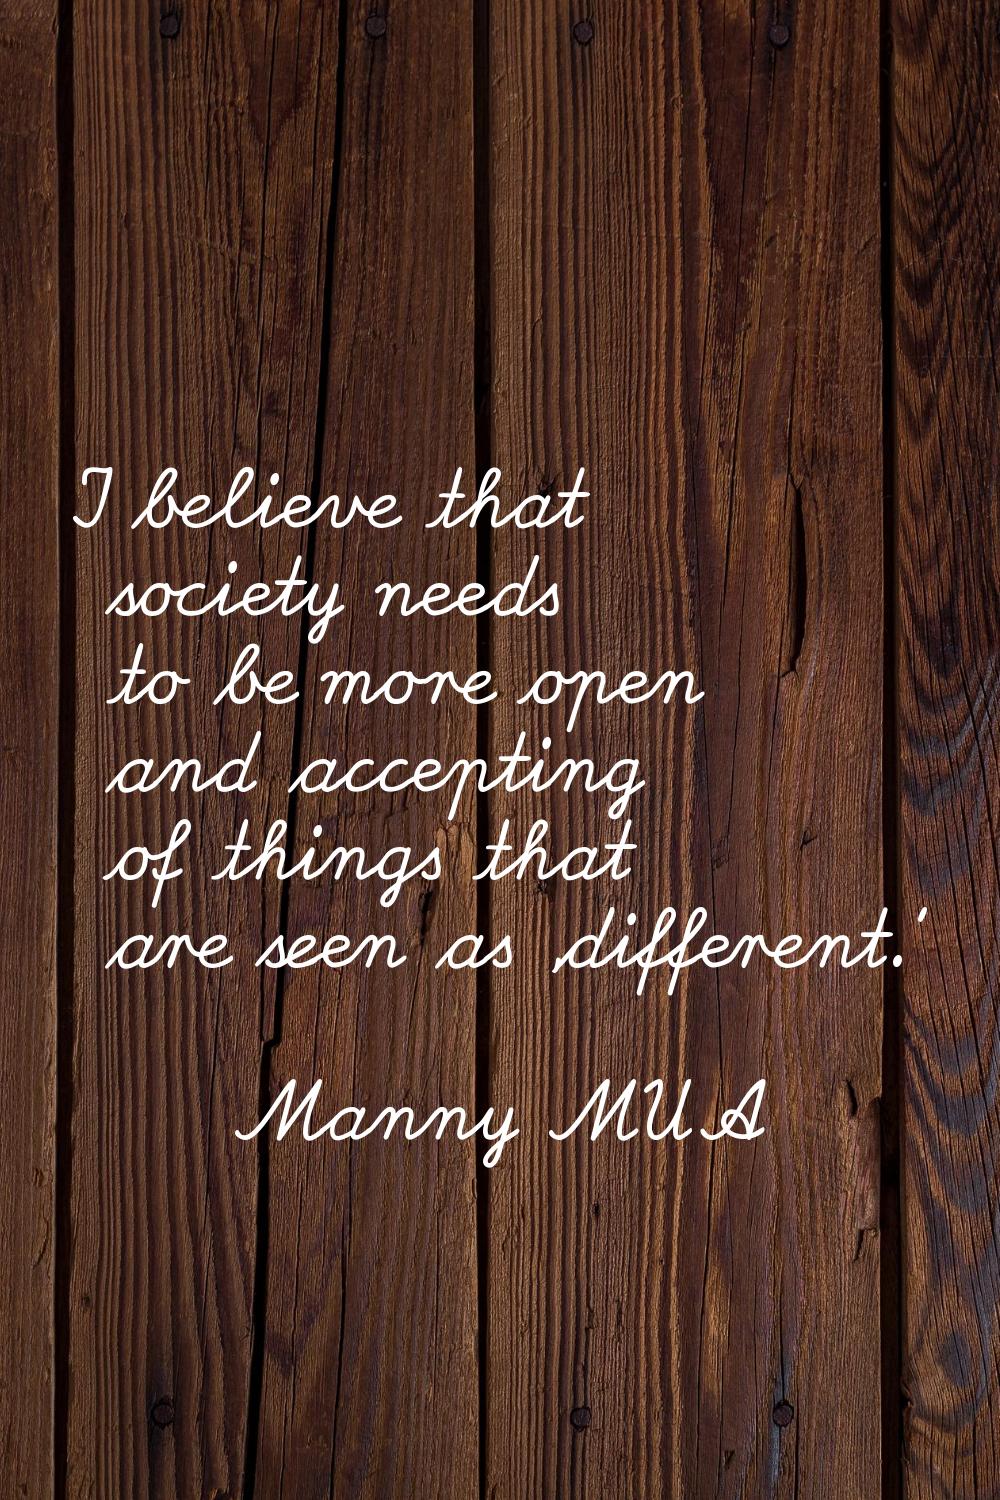 I believe that society needs to be more open and accepting of things that are seen as 'different.'